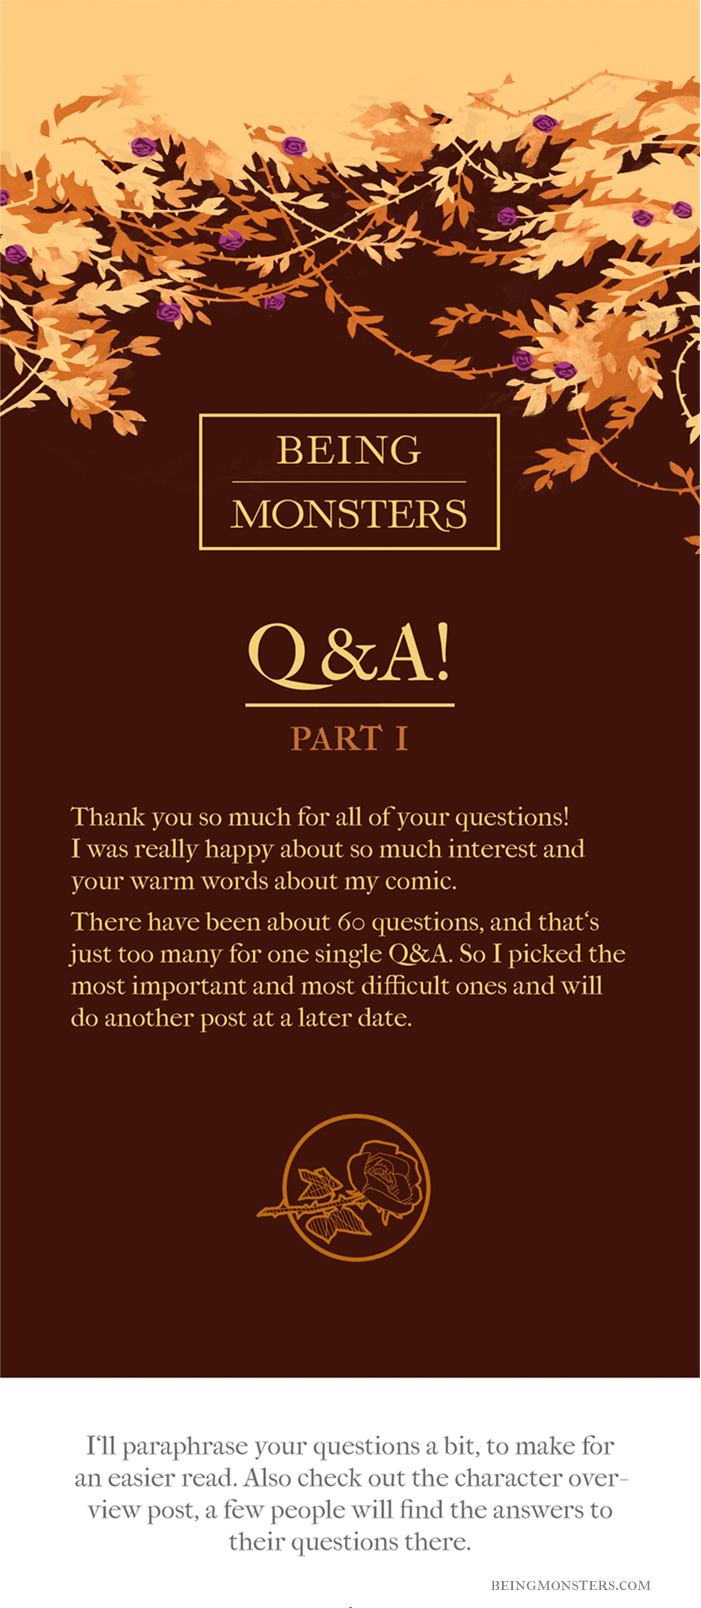 Being Monsters Q&A Part 1